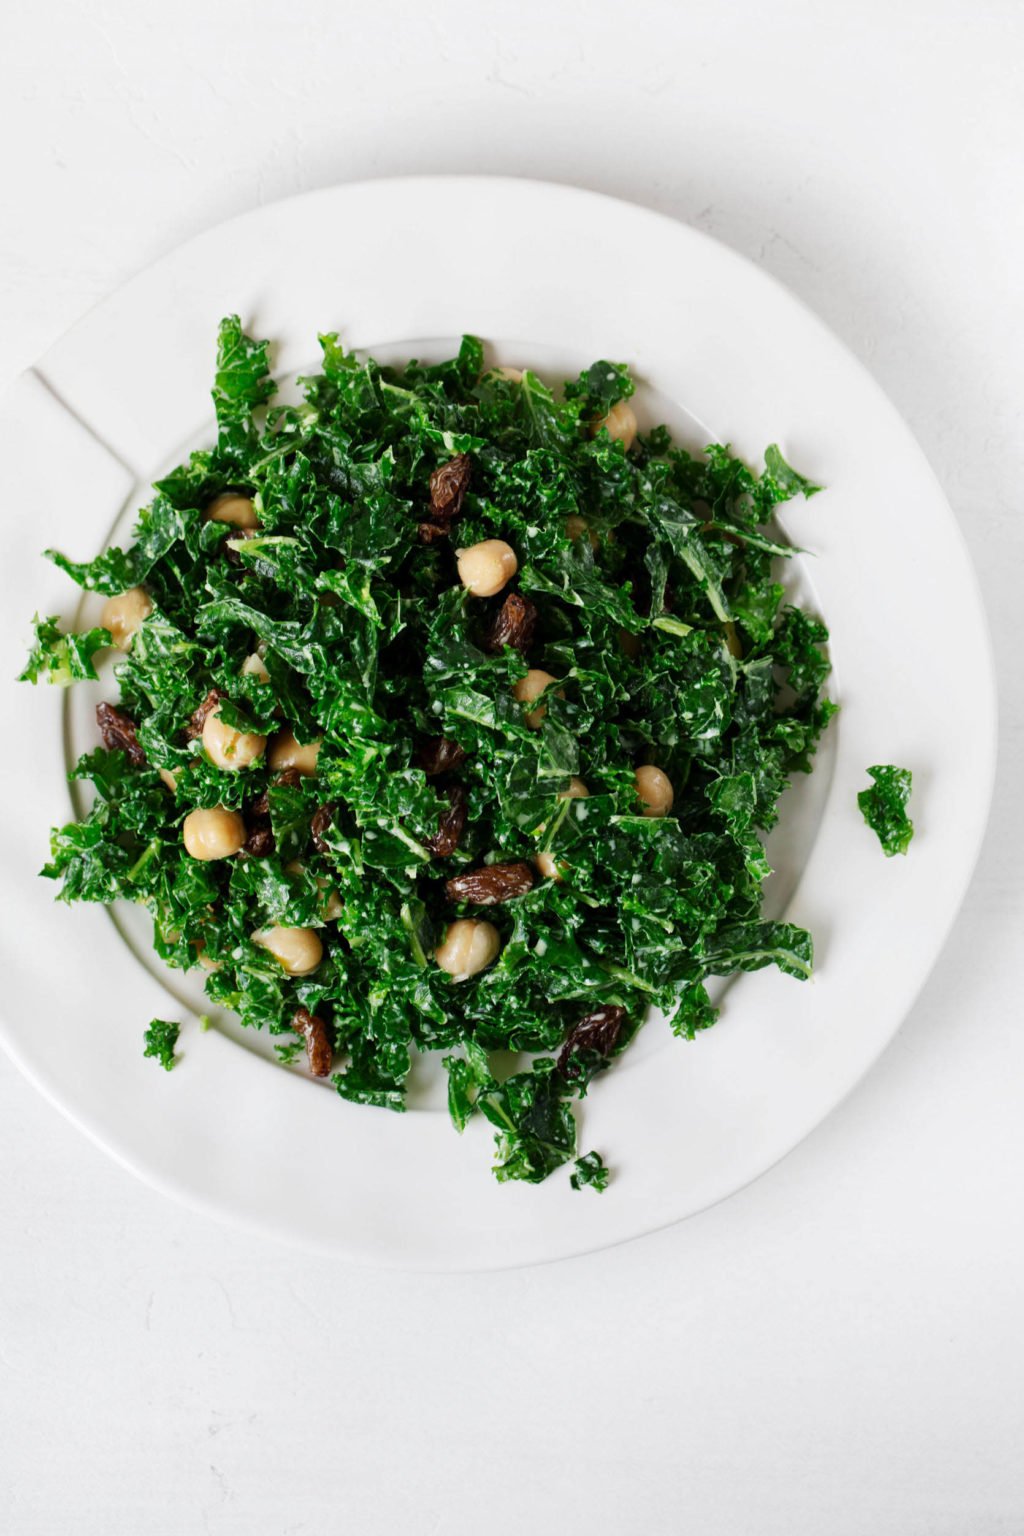 A white, rimmed salad plate has been piled with kale, chickpeas, raisins, and a creamy, tahini-based dressing.